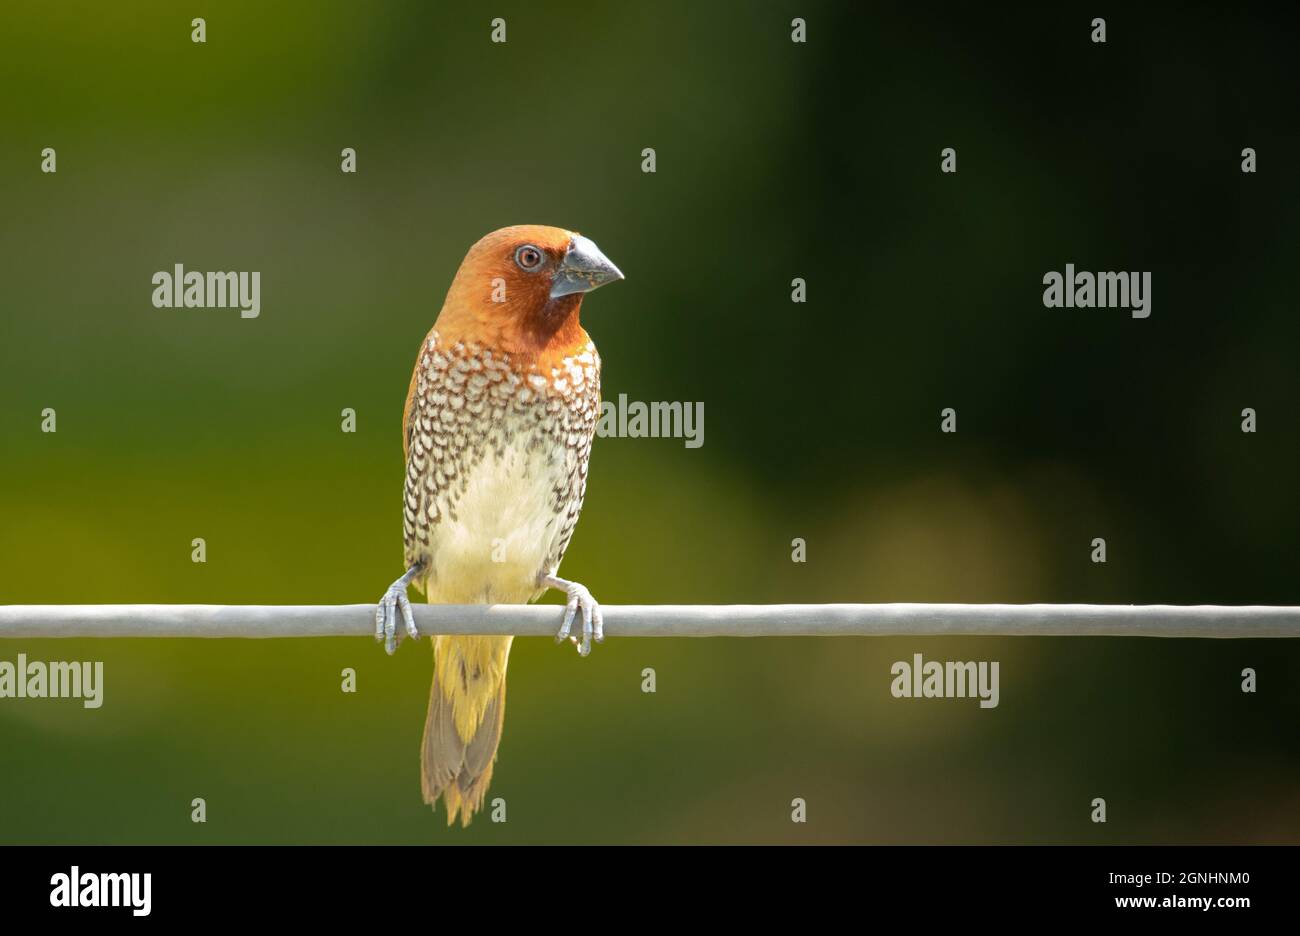 Scaly breasted munia bird sitting on a cable on green blurry background Stock Photo